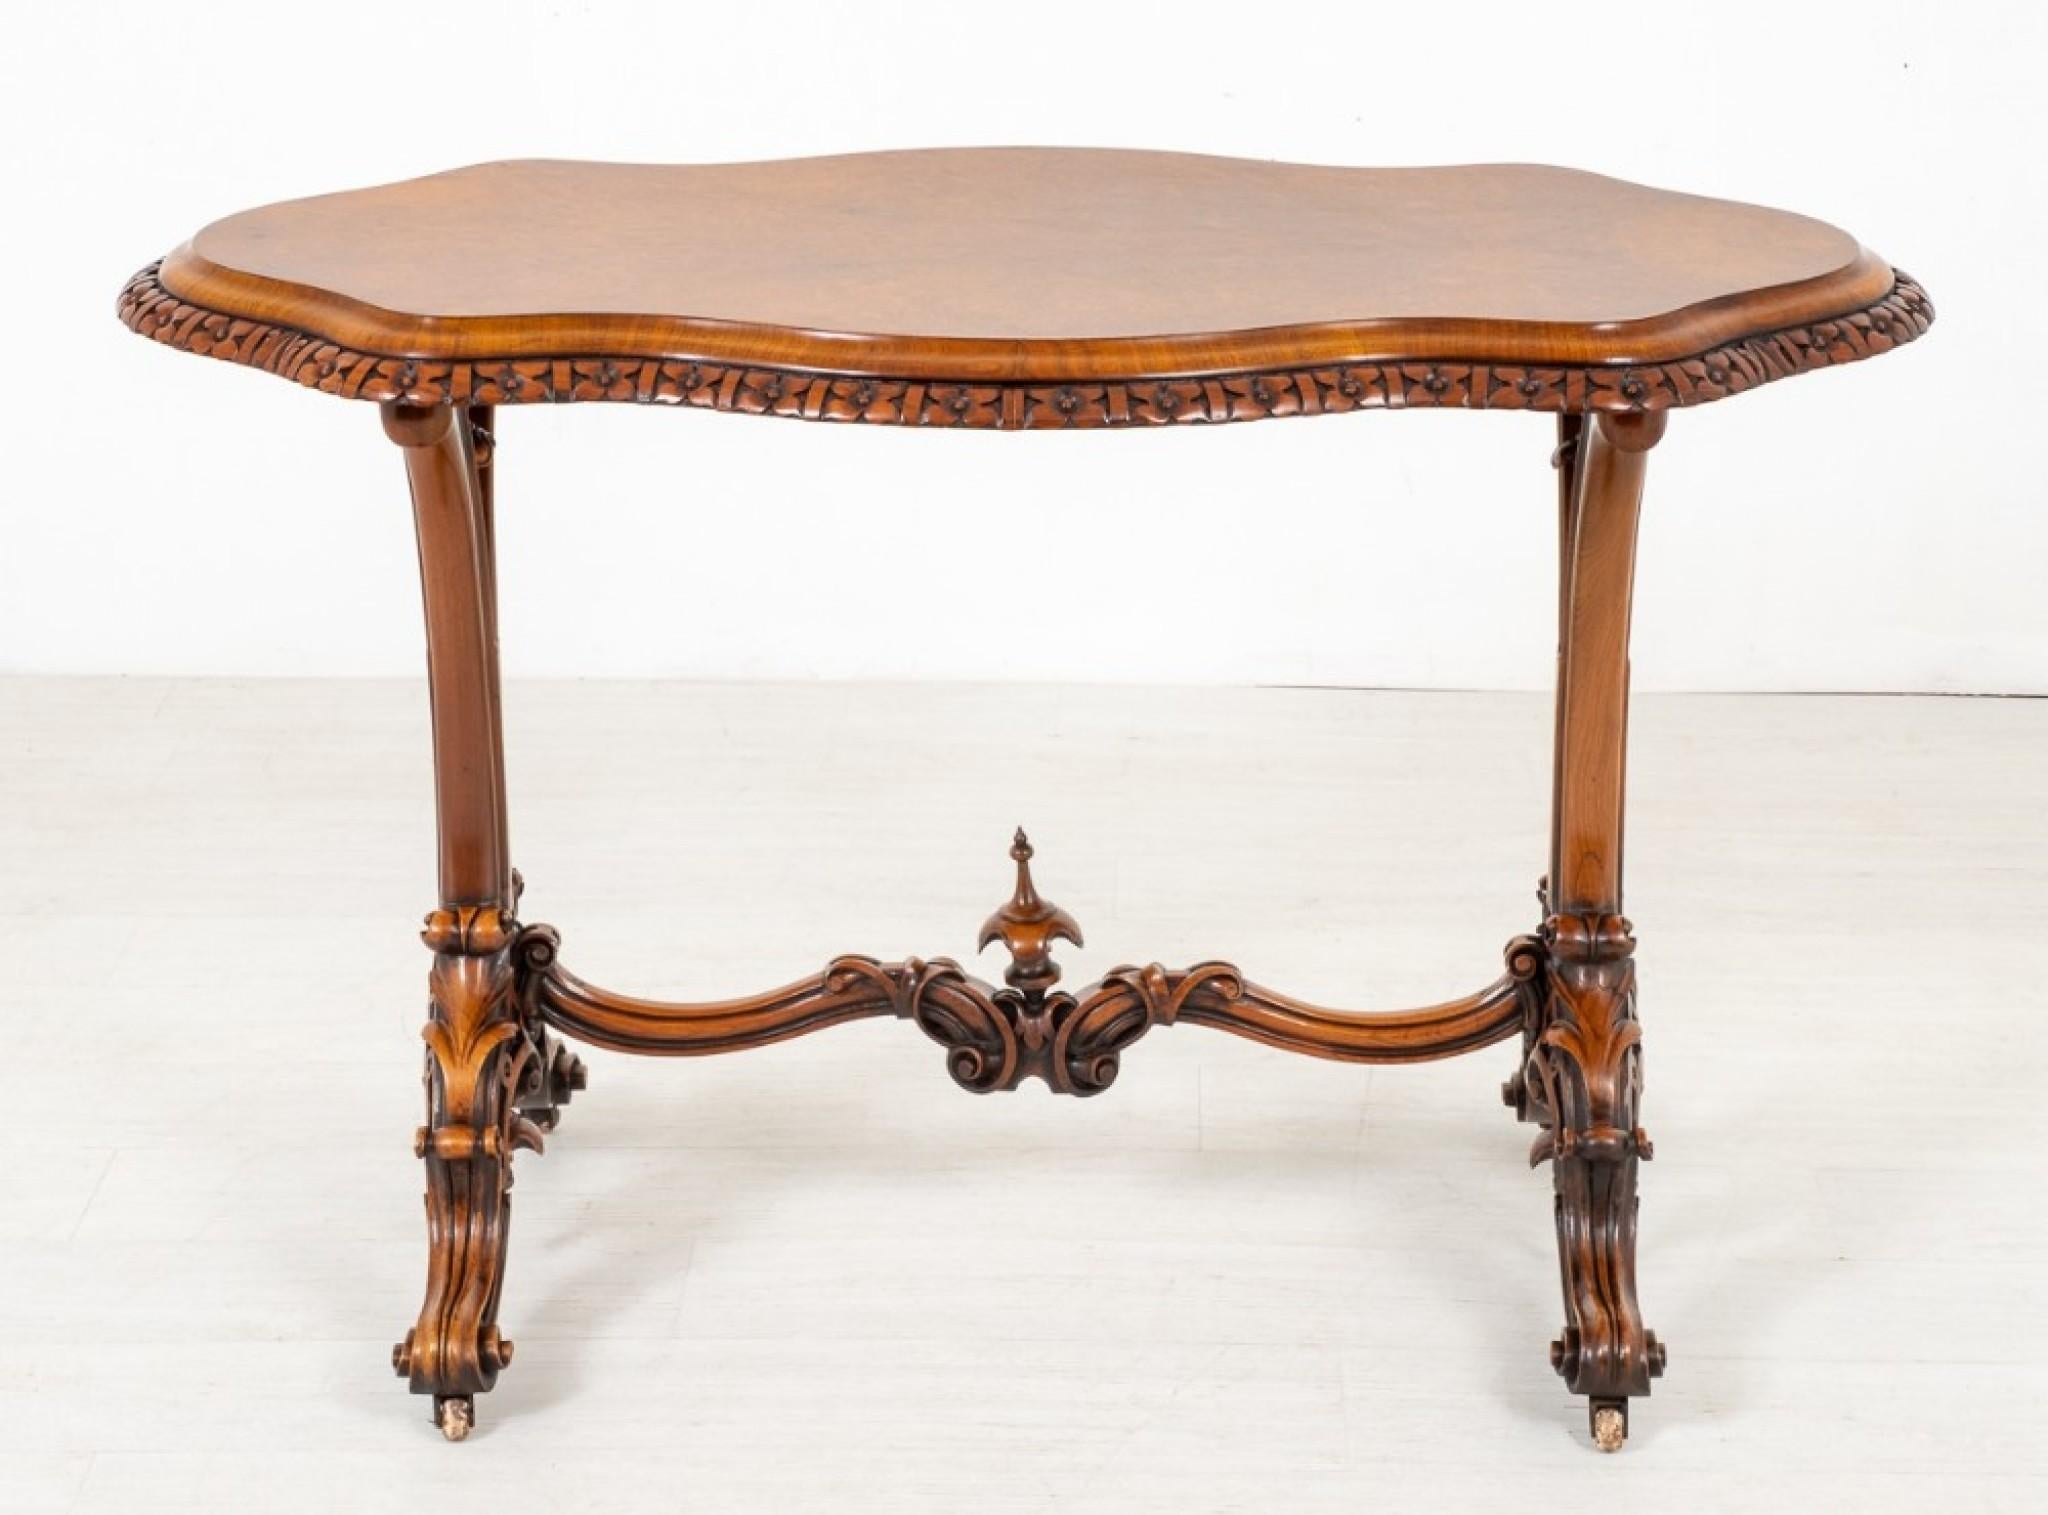 Victorian Stretcher Table, Antique Walnut Side Table 1860 For Sale 2